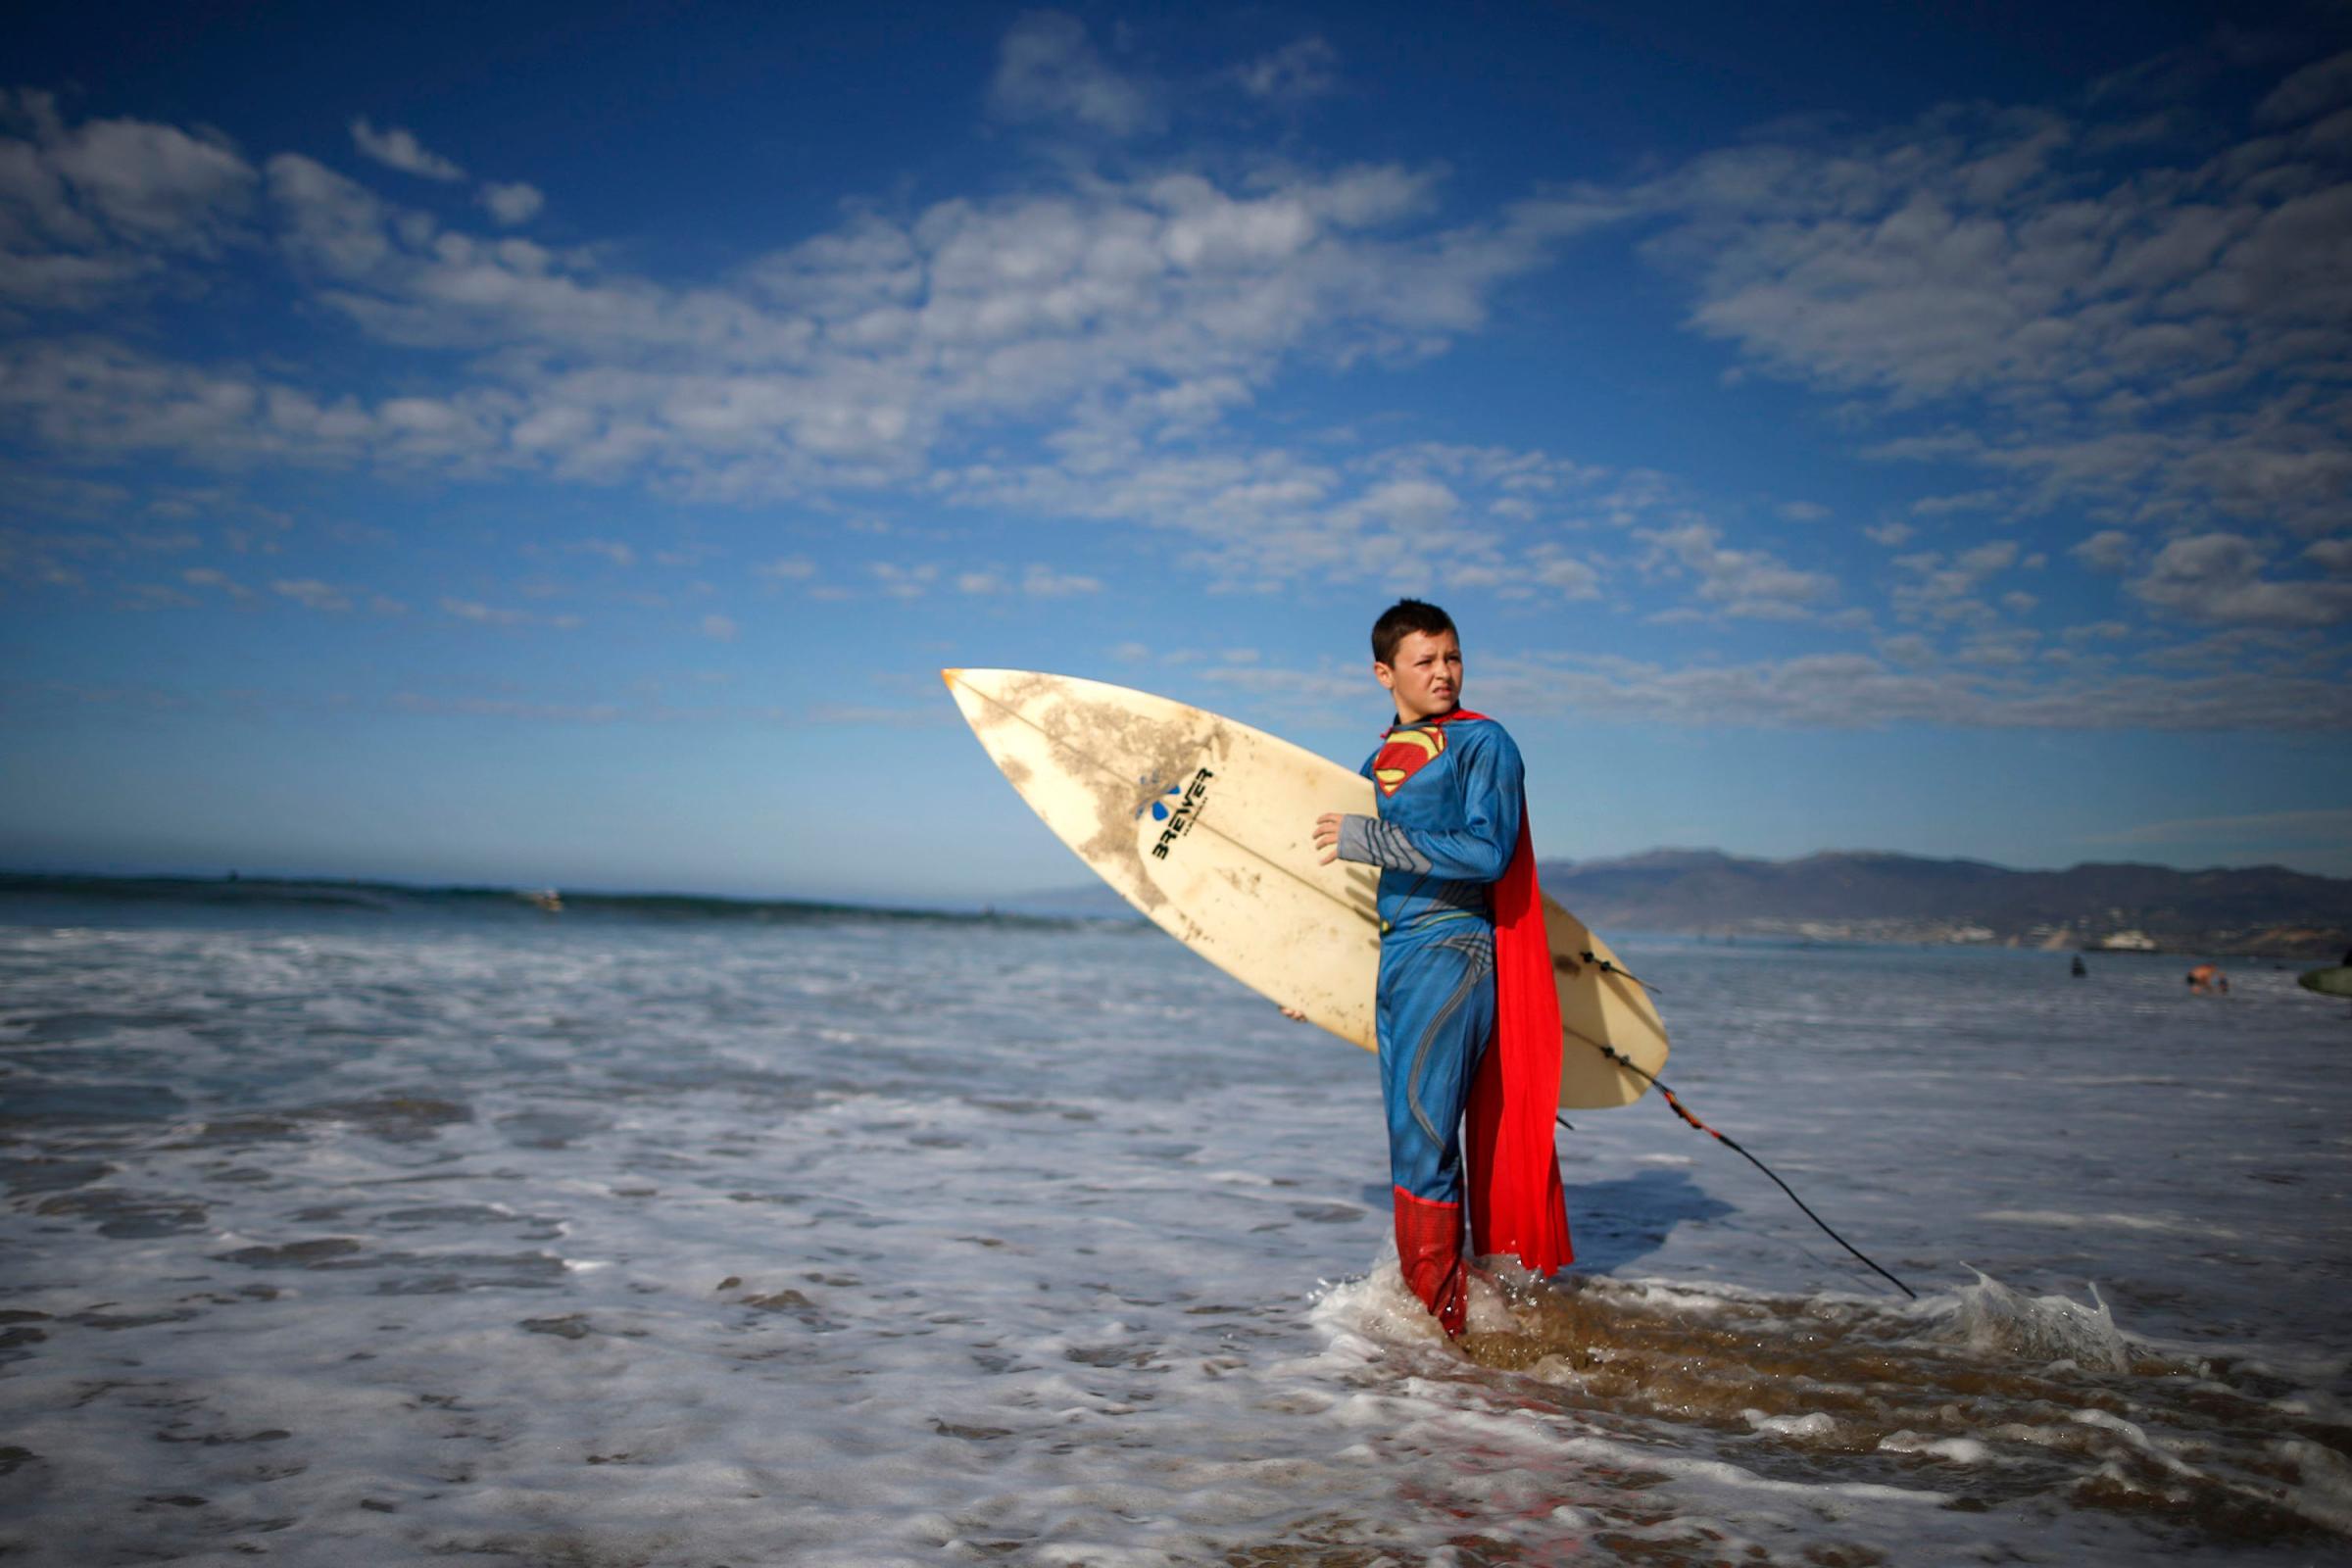 Catello Dannunzio, 12, prepares to compete as Superman during the 7th annual ZJ Boarding House Haunted Heats Halloween surf contest in Santa Monica